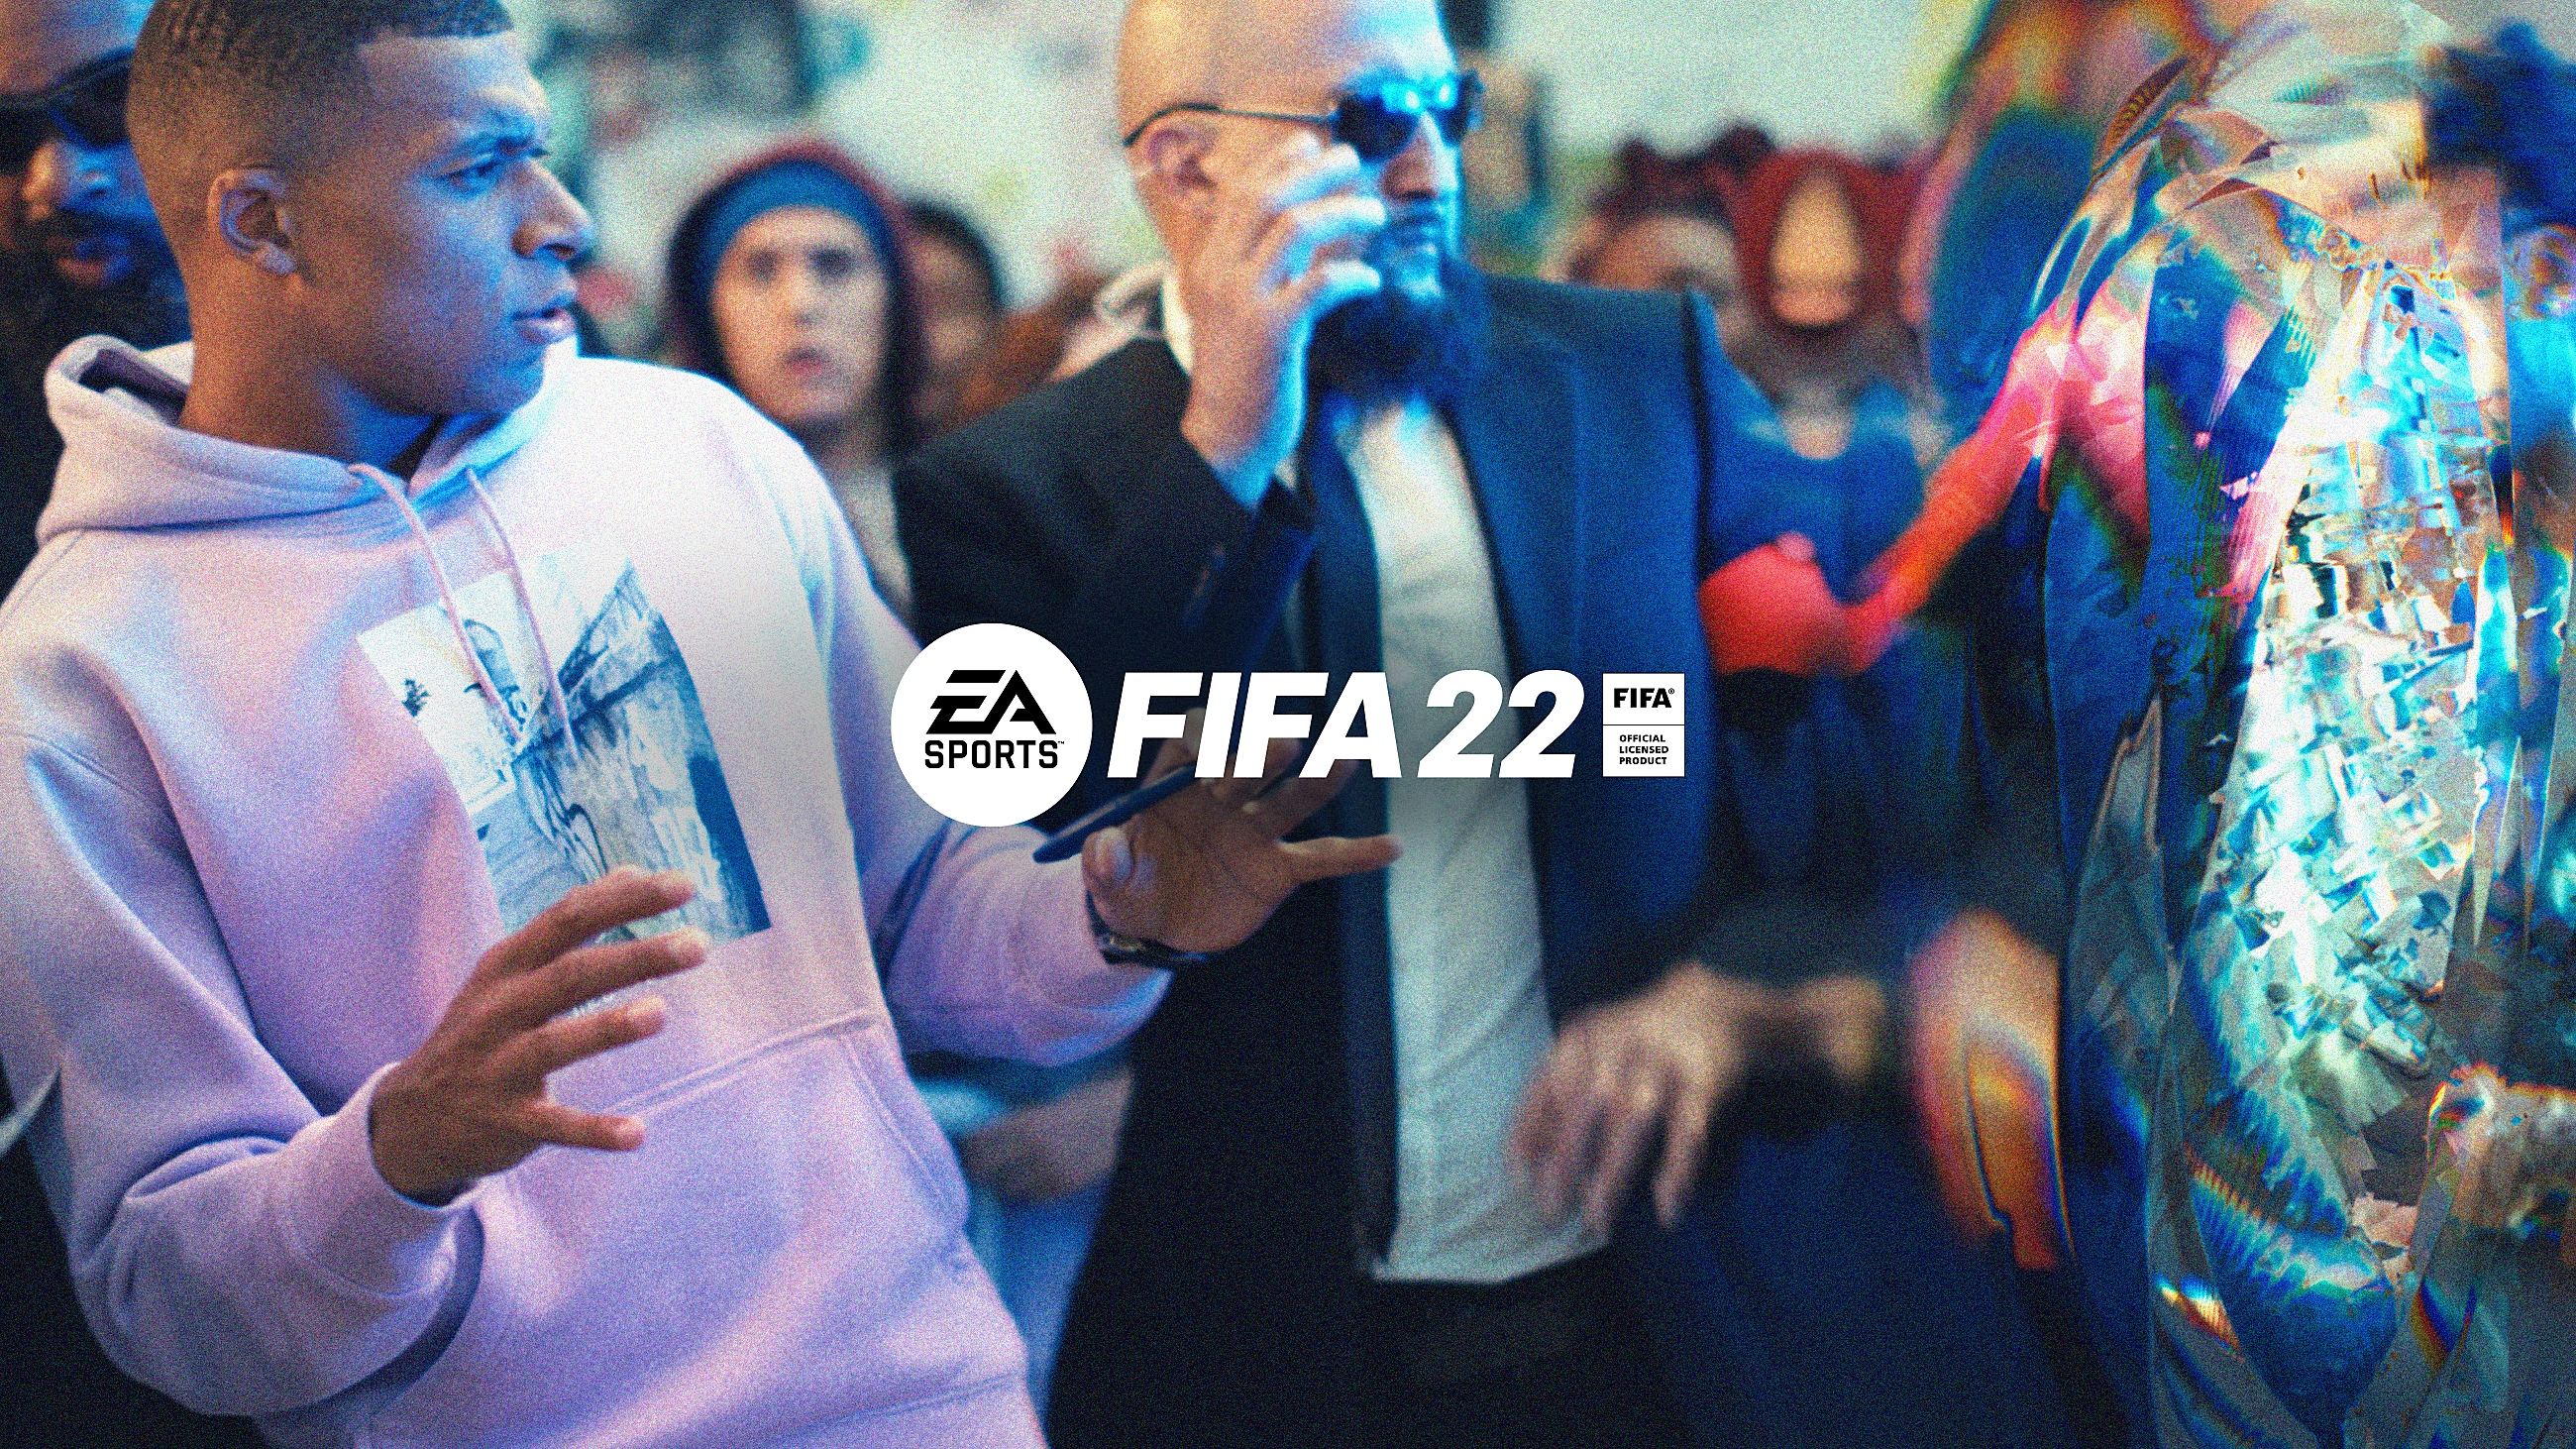 PS4 / PS5『FIFA 22』官方發行預告片「Powered by Football」